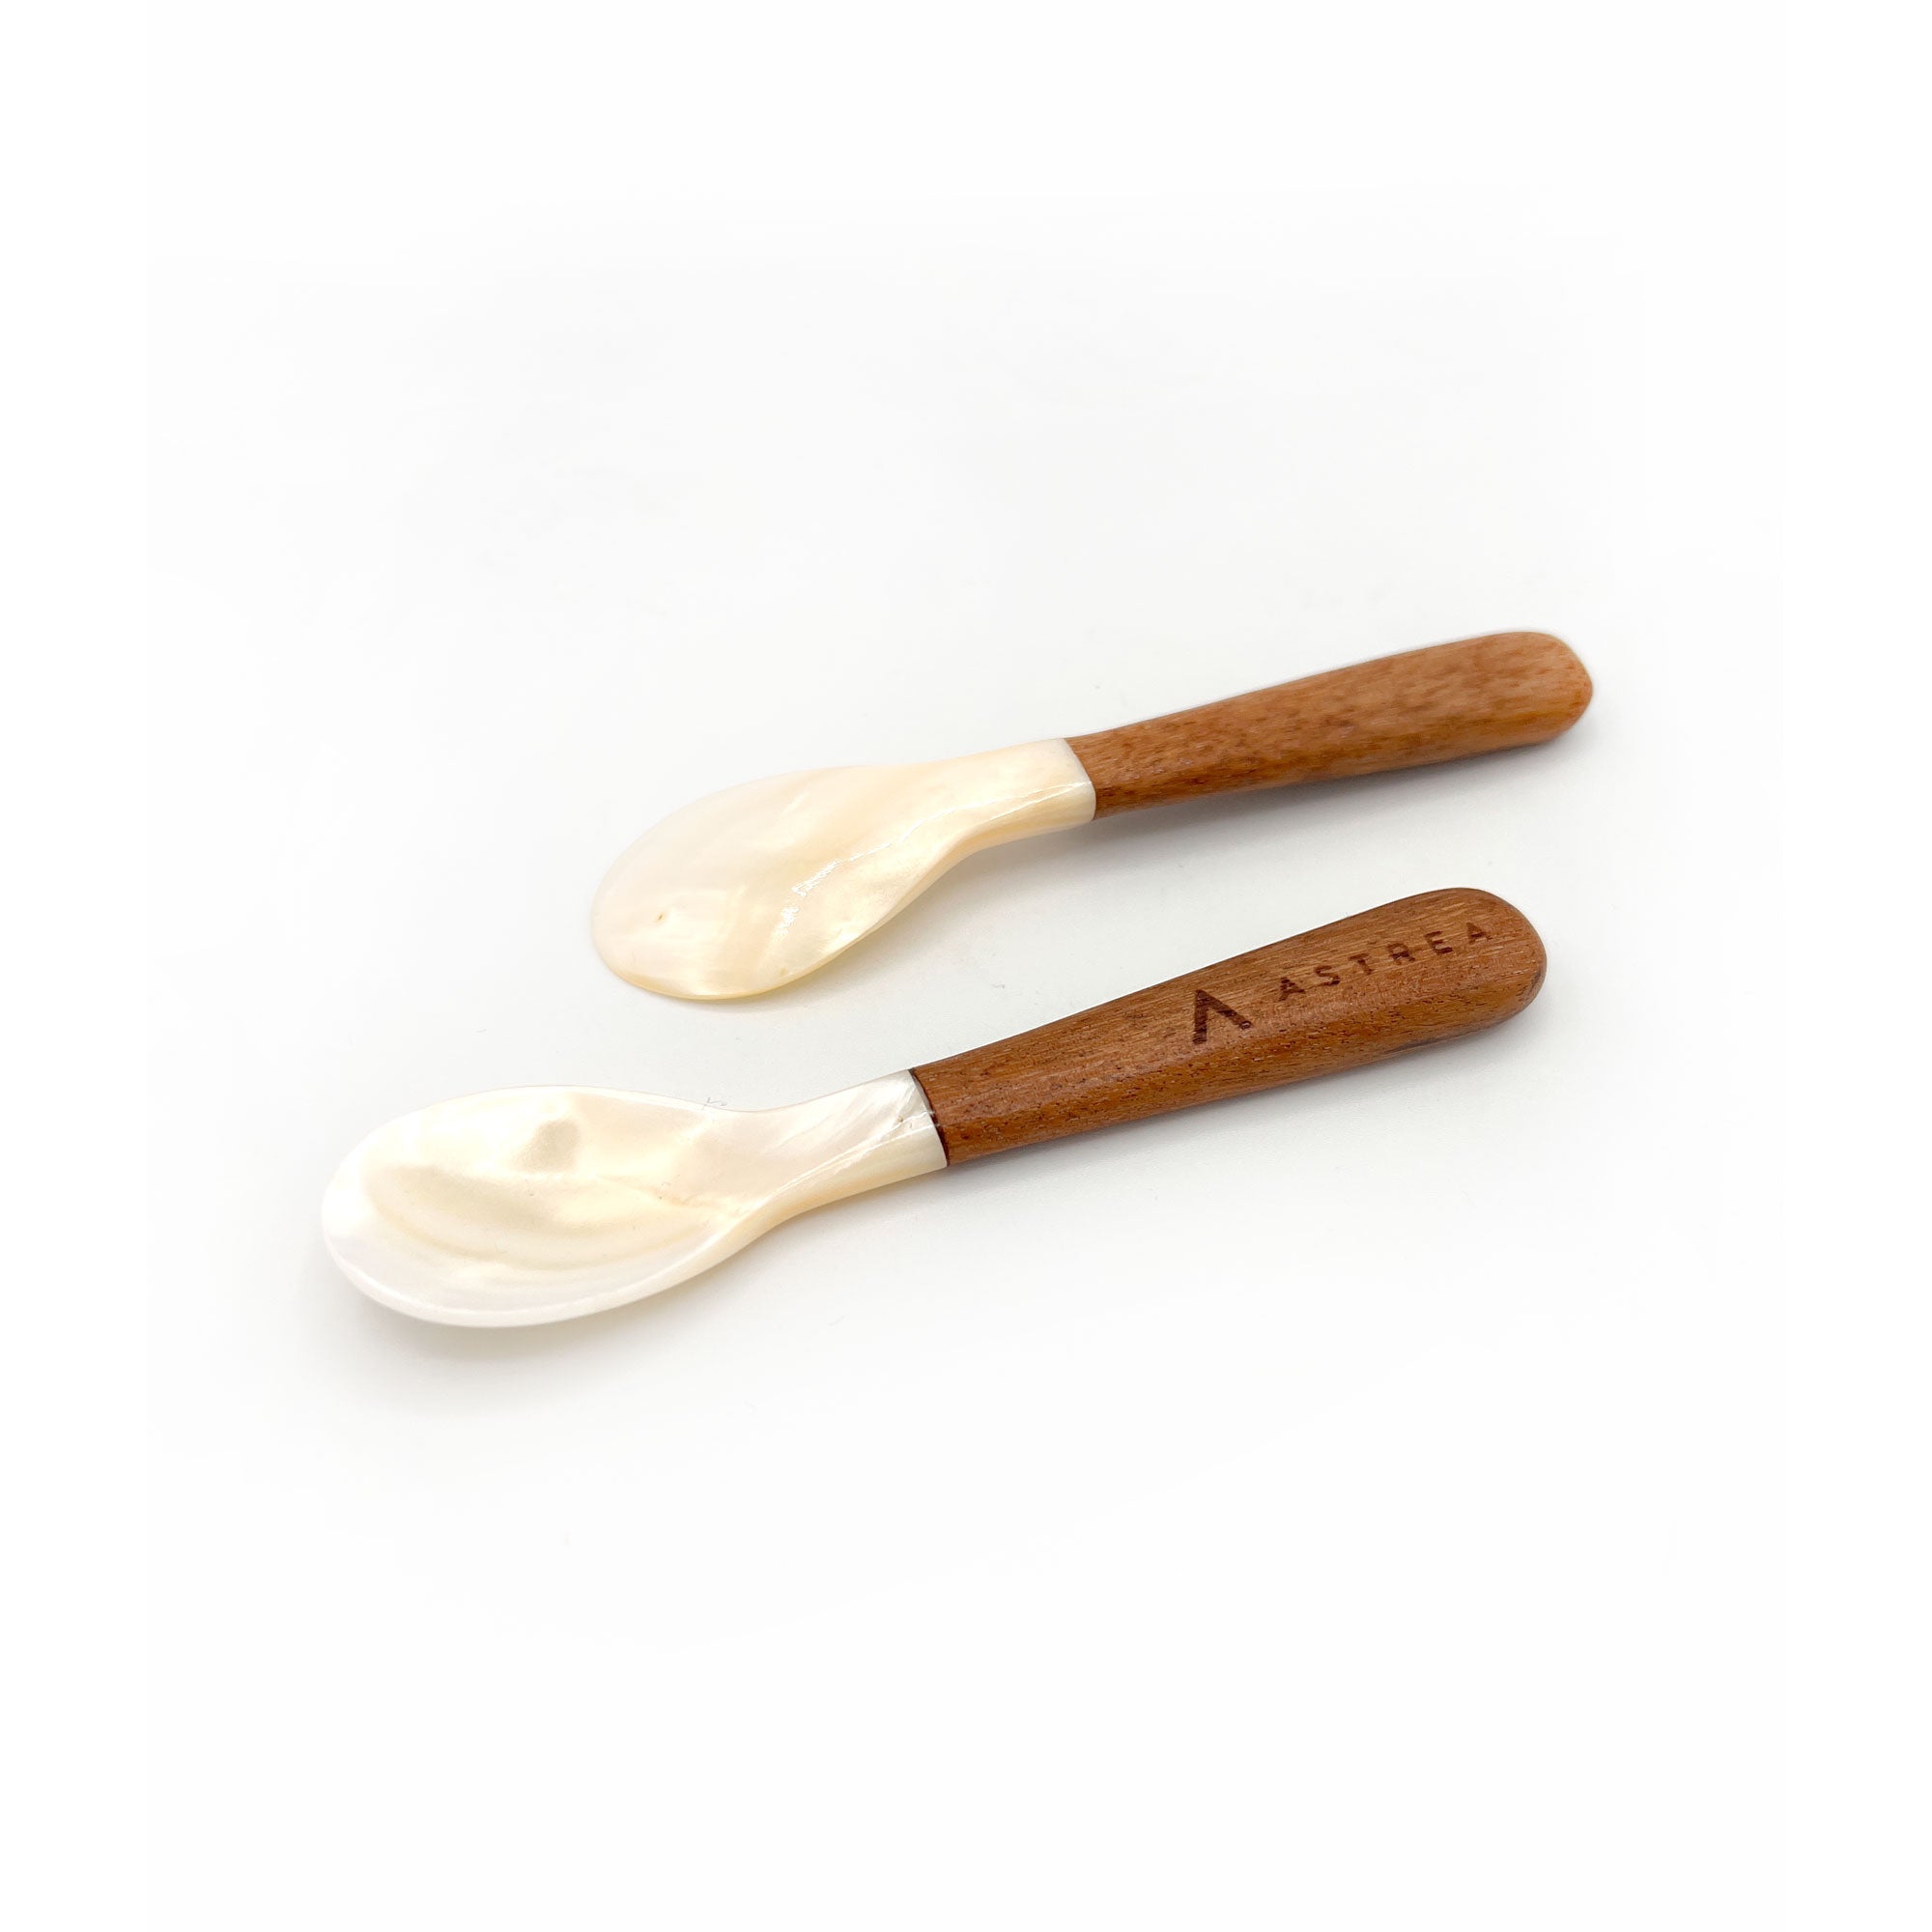 Astrea Mother of Pearl Spoon w/ Wooden Handle